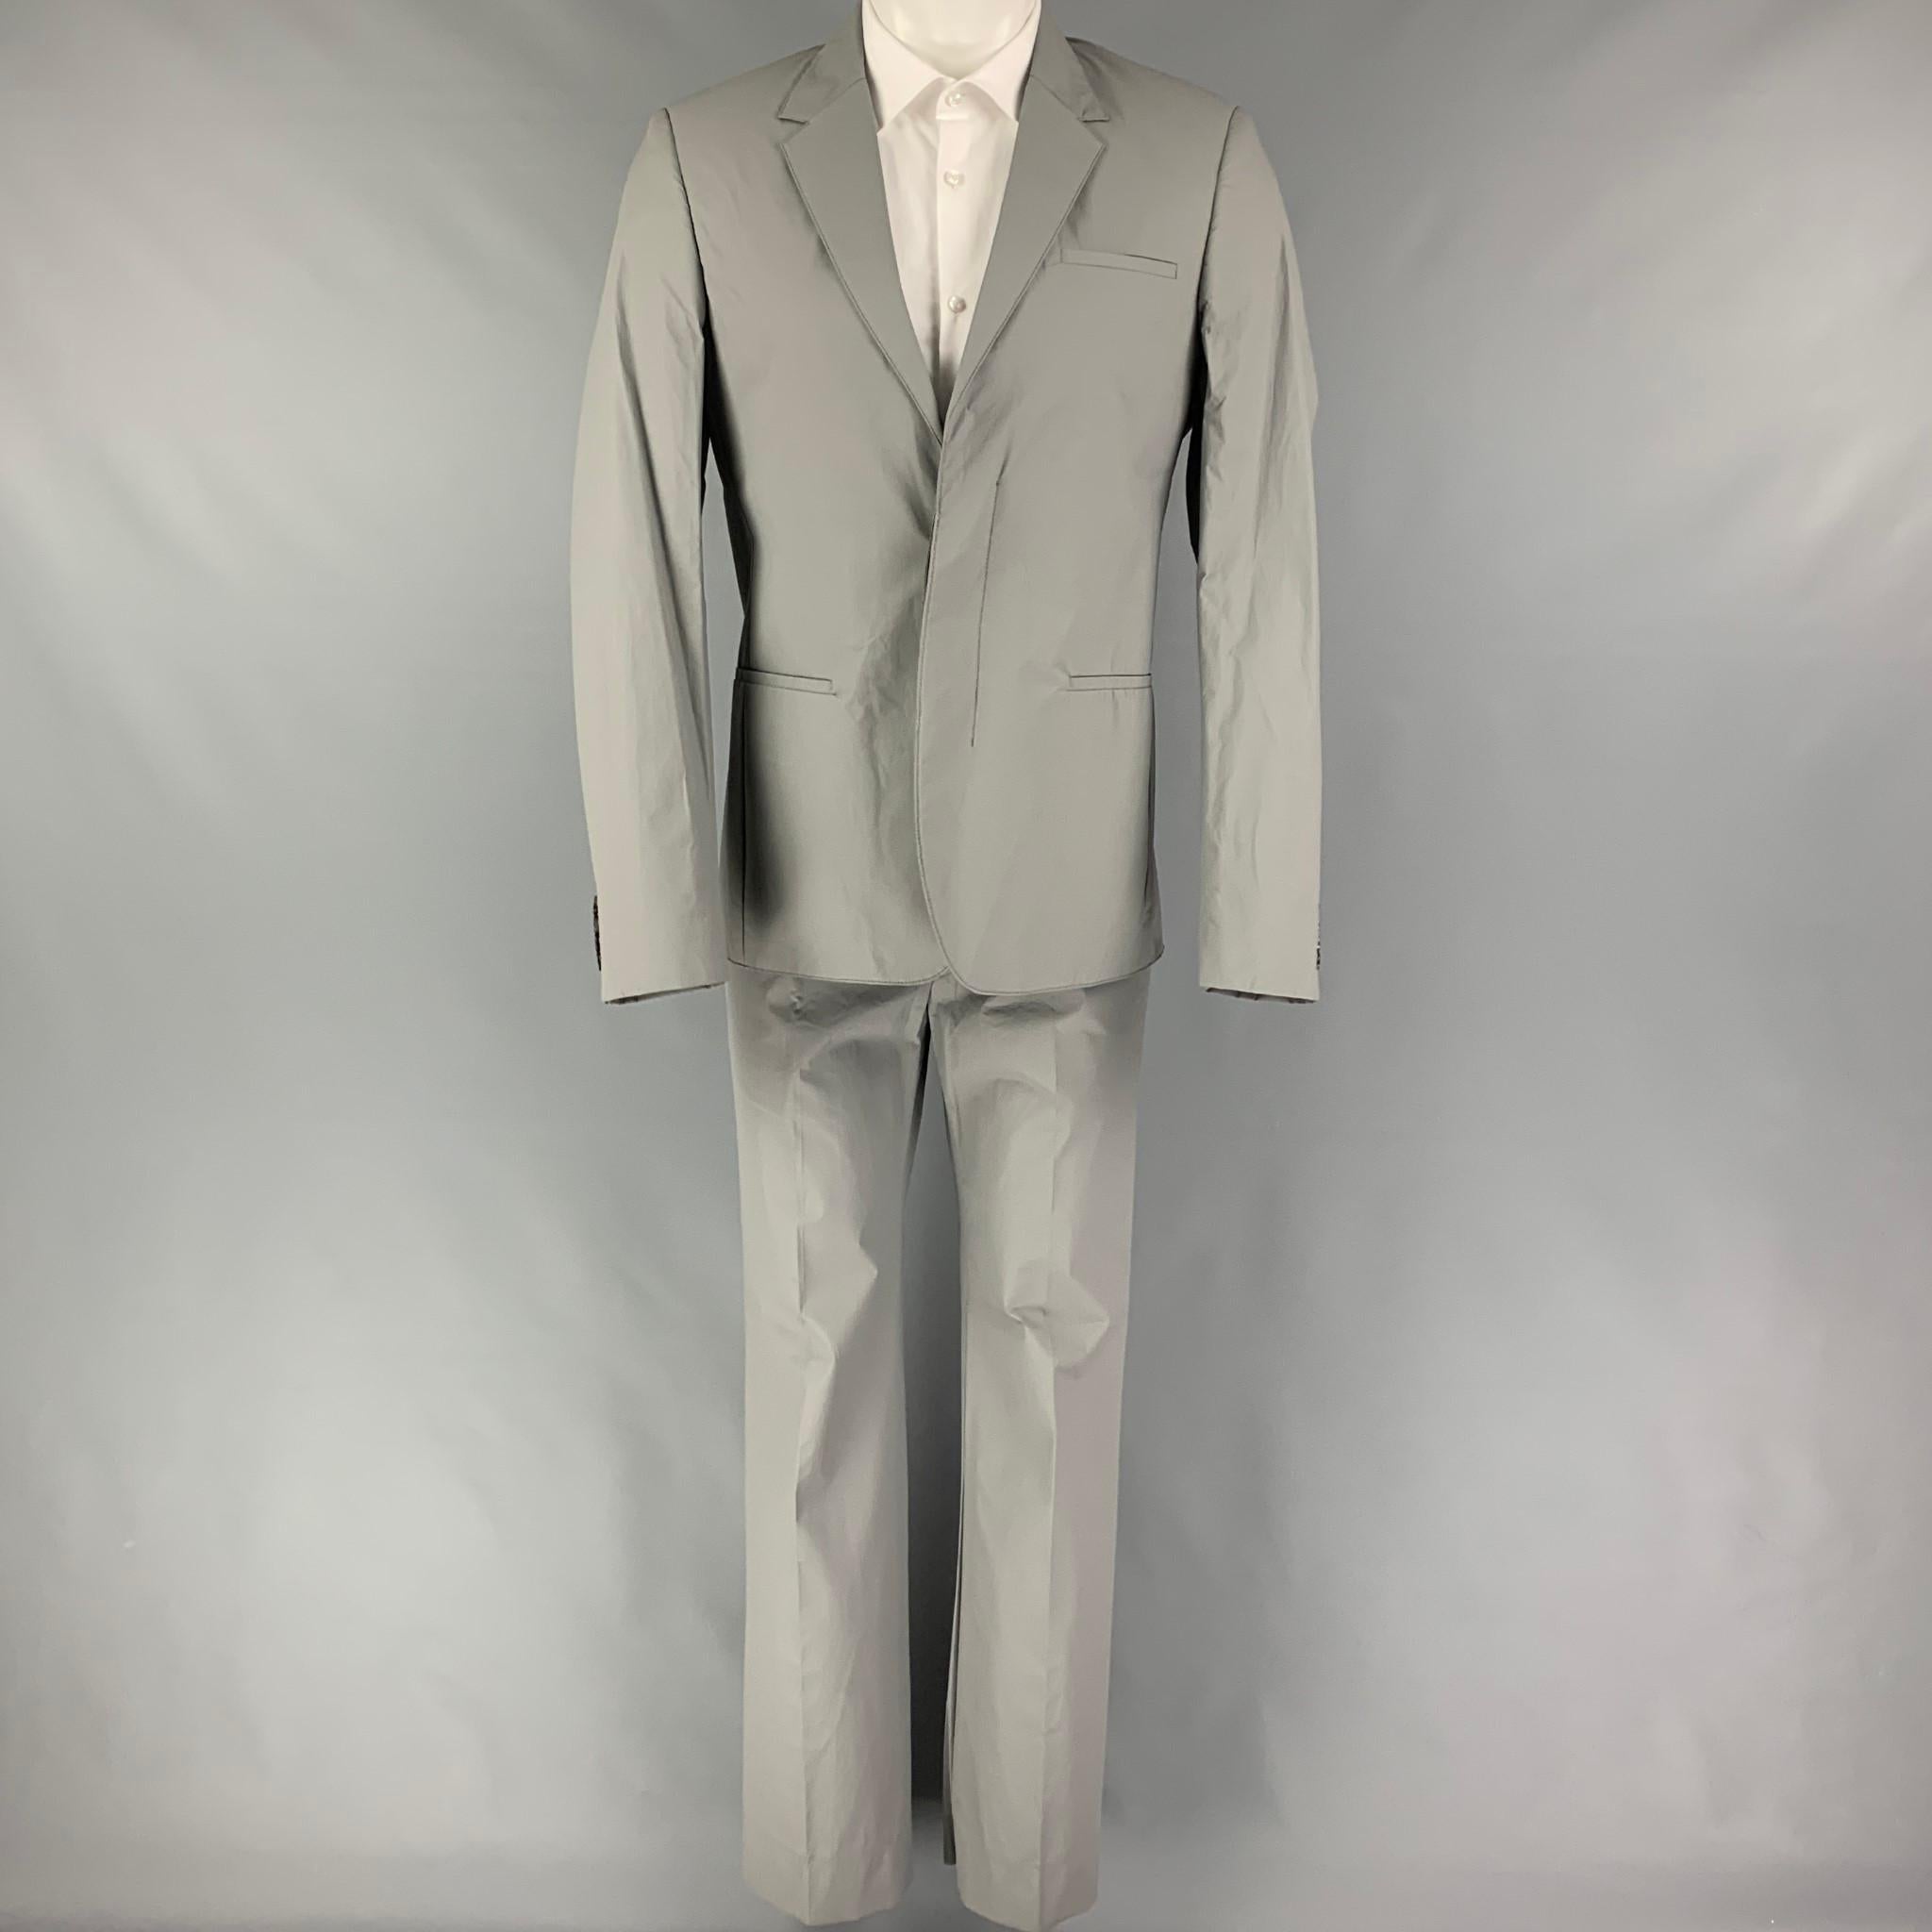 CALVIN KLEIN COLLECTION suit comes in a grey polyurethane / polyester with a full liner and includes a single breasted, double button sport coat with a notch lapel and matching flat front trousers. Made in Italy.

New With Tags.
Marked: